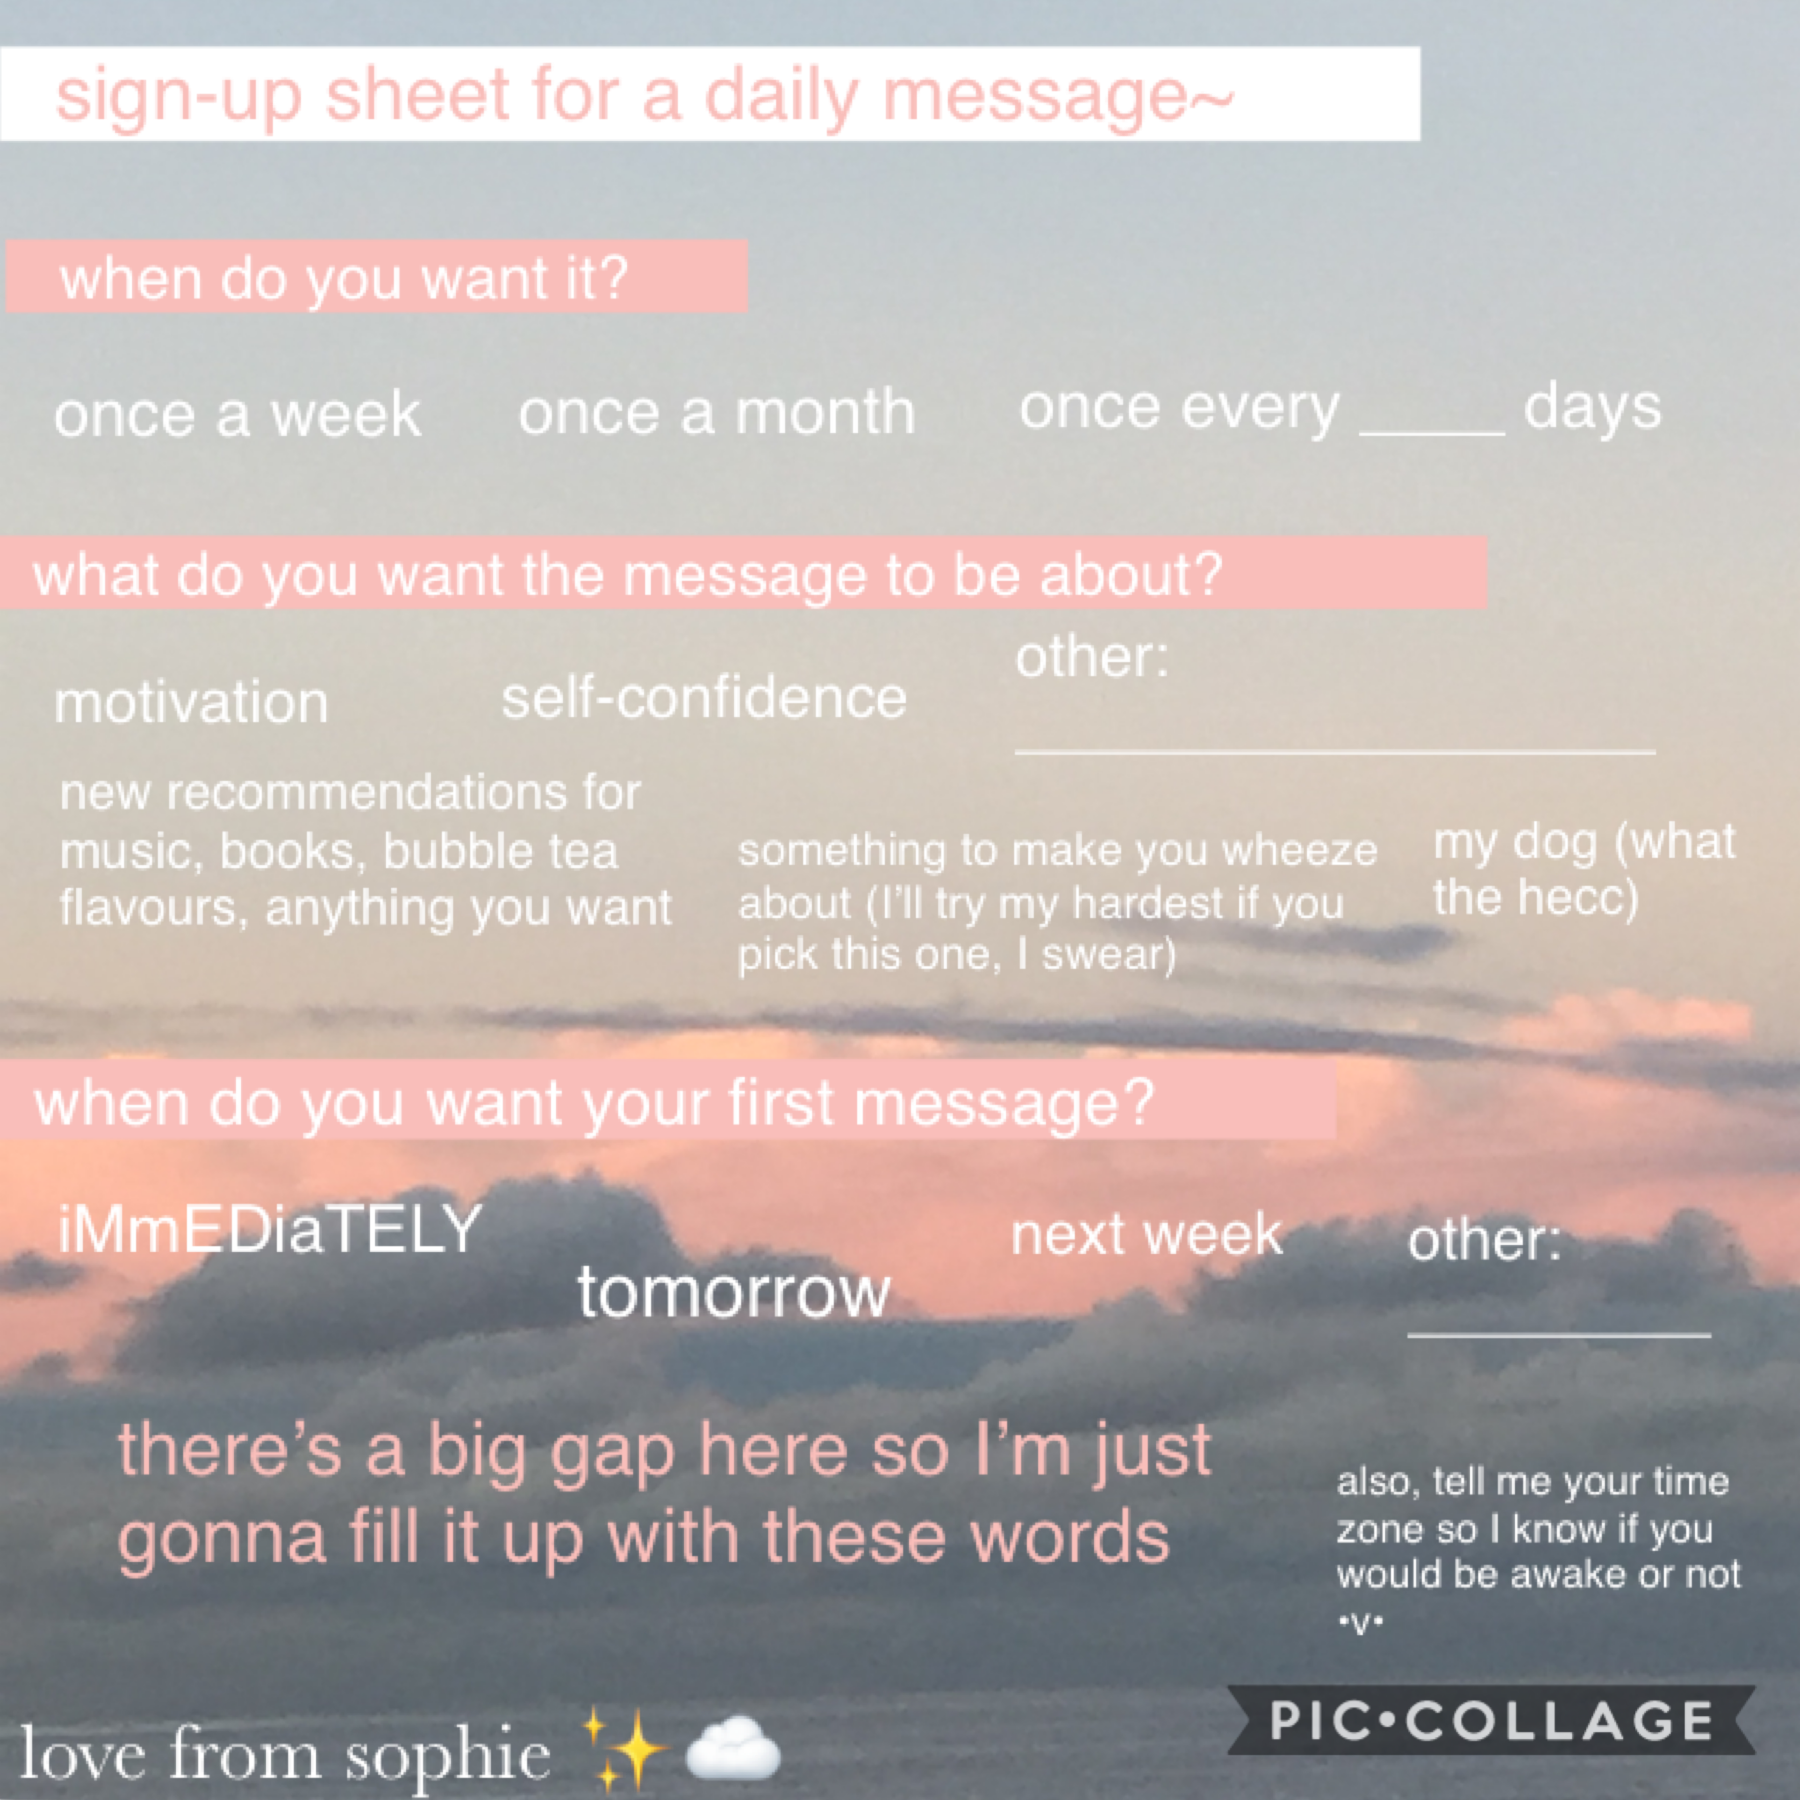 heyheyhey friendsss (tap)

So this is just a random sign up sheet for a daily message from me :D I’ll put more info in the remixes and stuff. Yeah. Hope y’all doing well homiesssss

yoohhh

sophie✨☁️